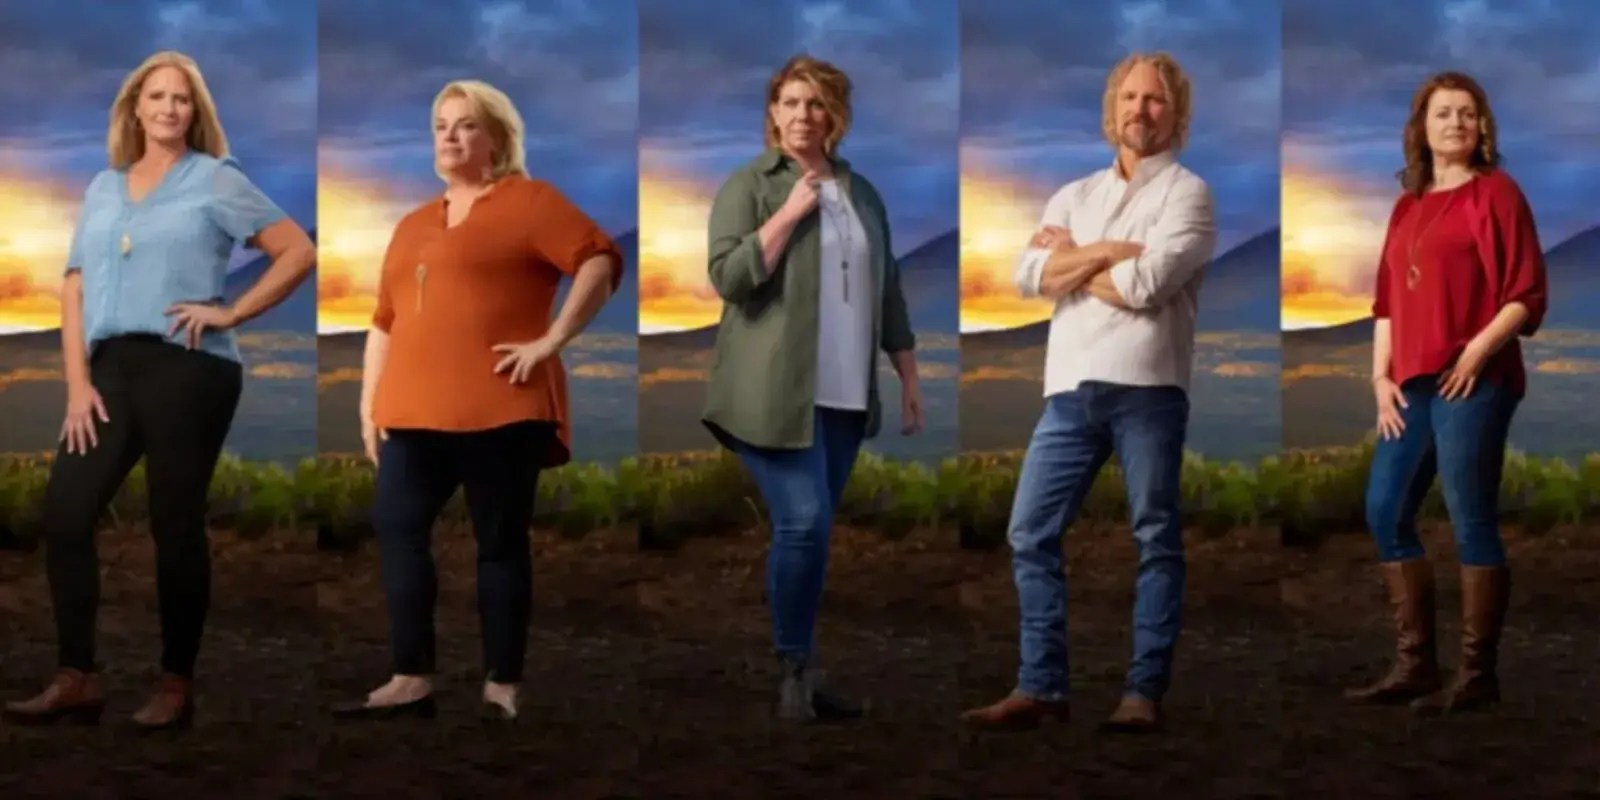 Christine, Janelle, Meri, Kody, and Robyn Brown pose for promotional photos for season 18 of 'Sister Wives', the series' tell-all episodes will air in November and December.